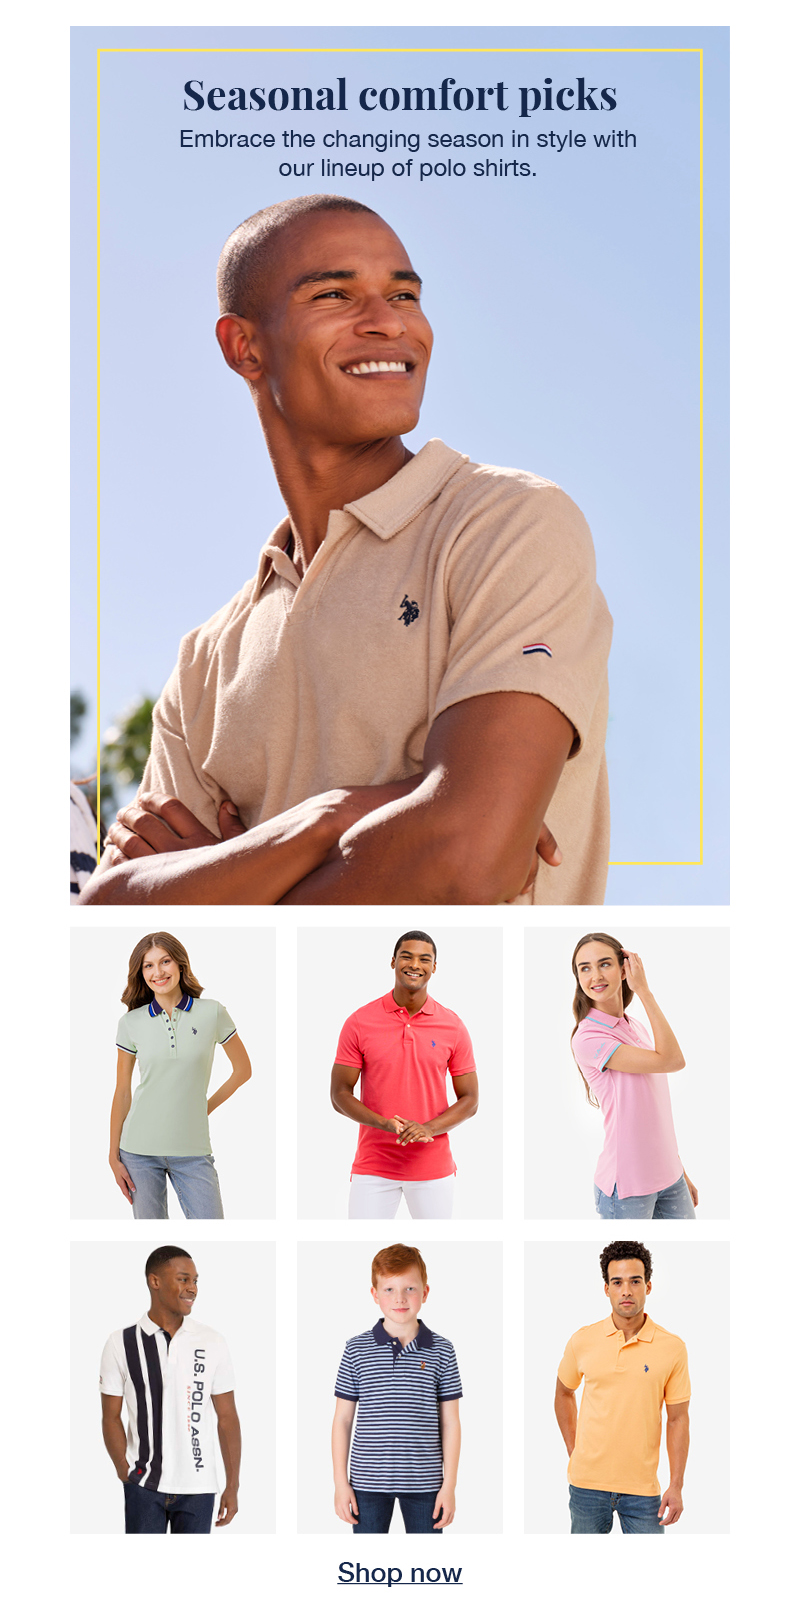 Season comfort picks: Embrace the changing season in style with our lineup of polo shirts. Shop now